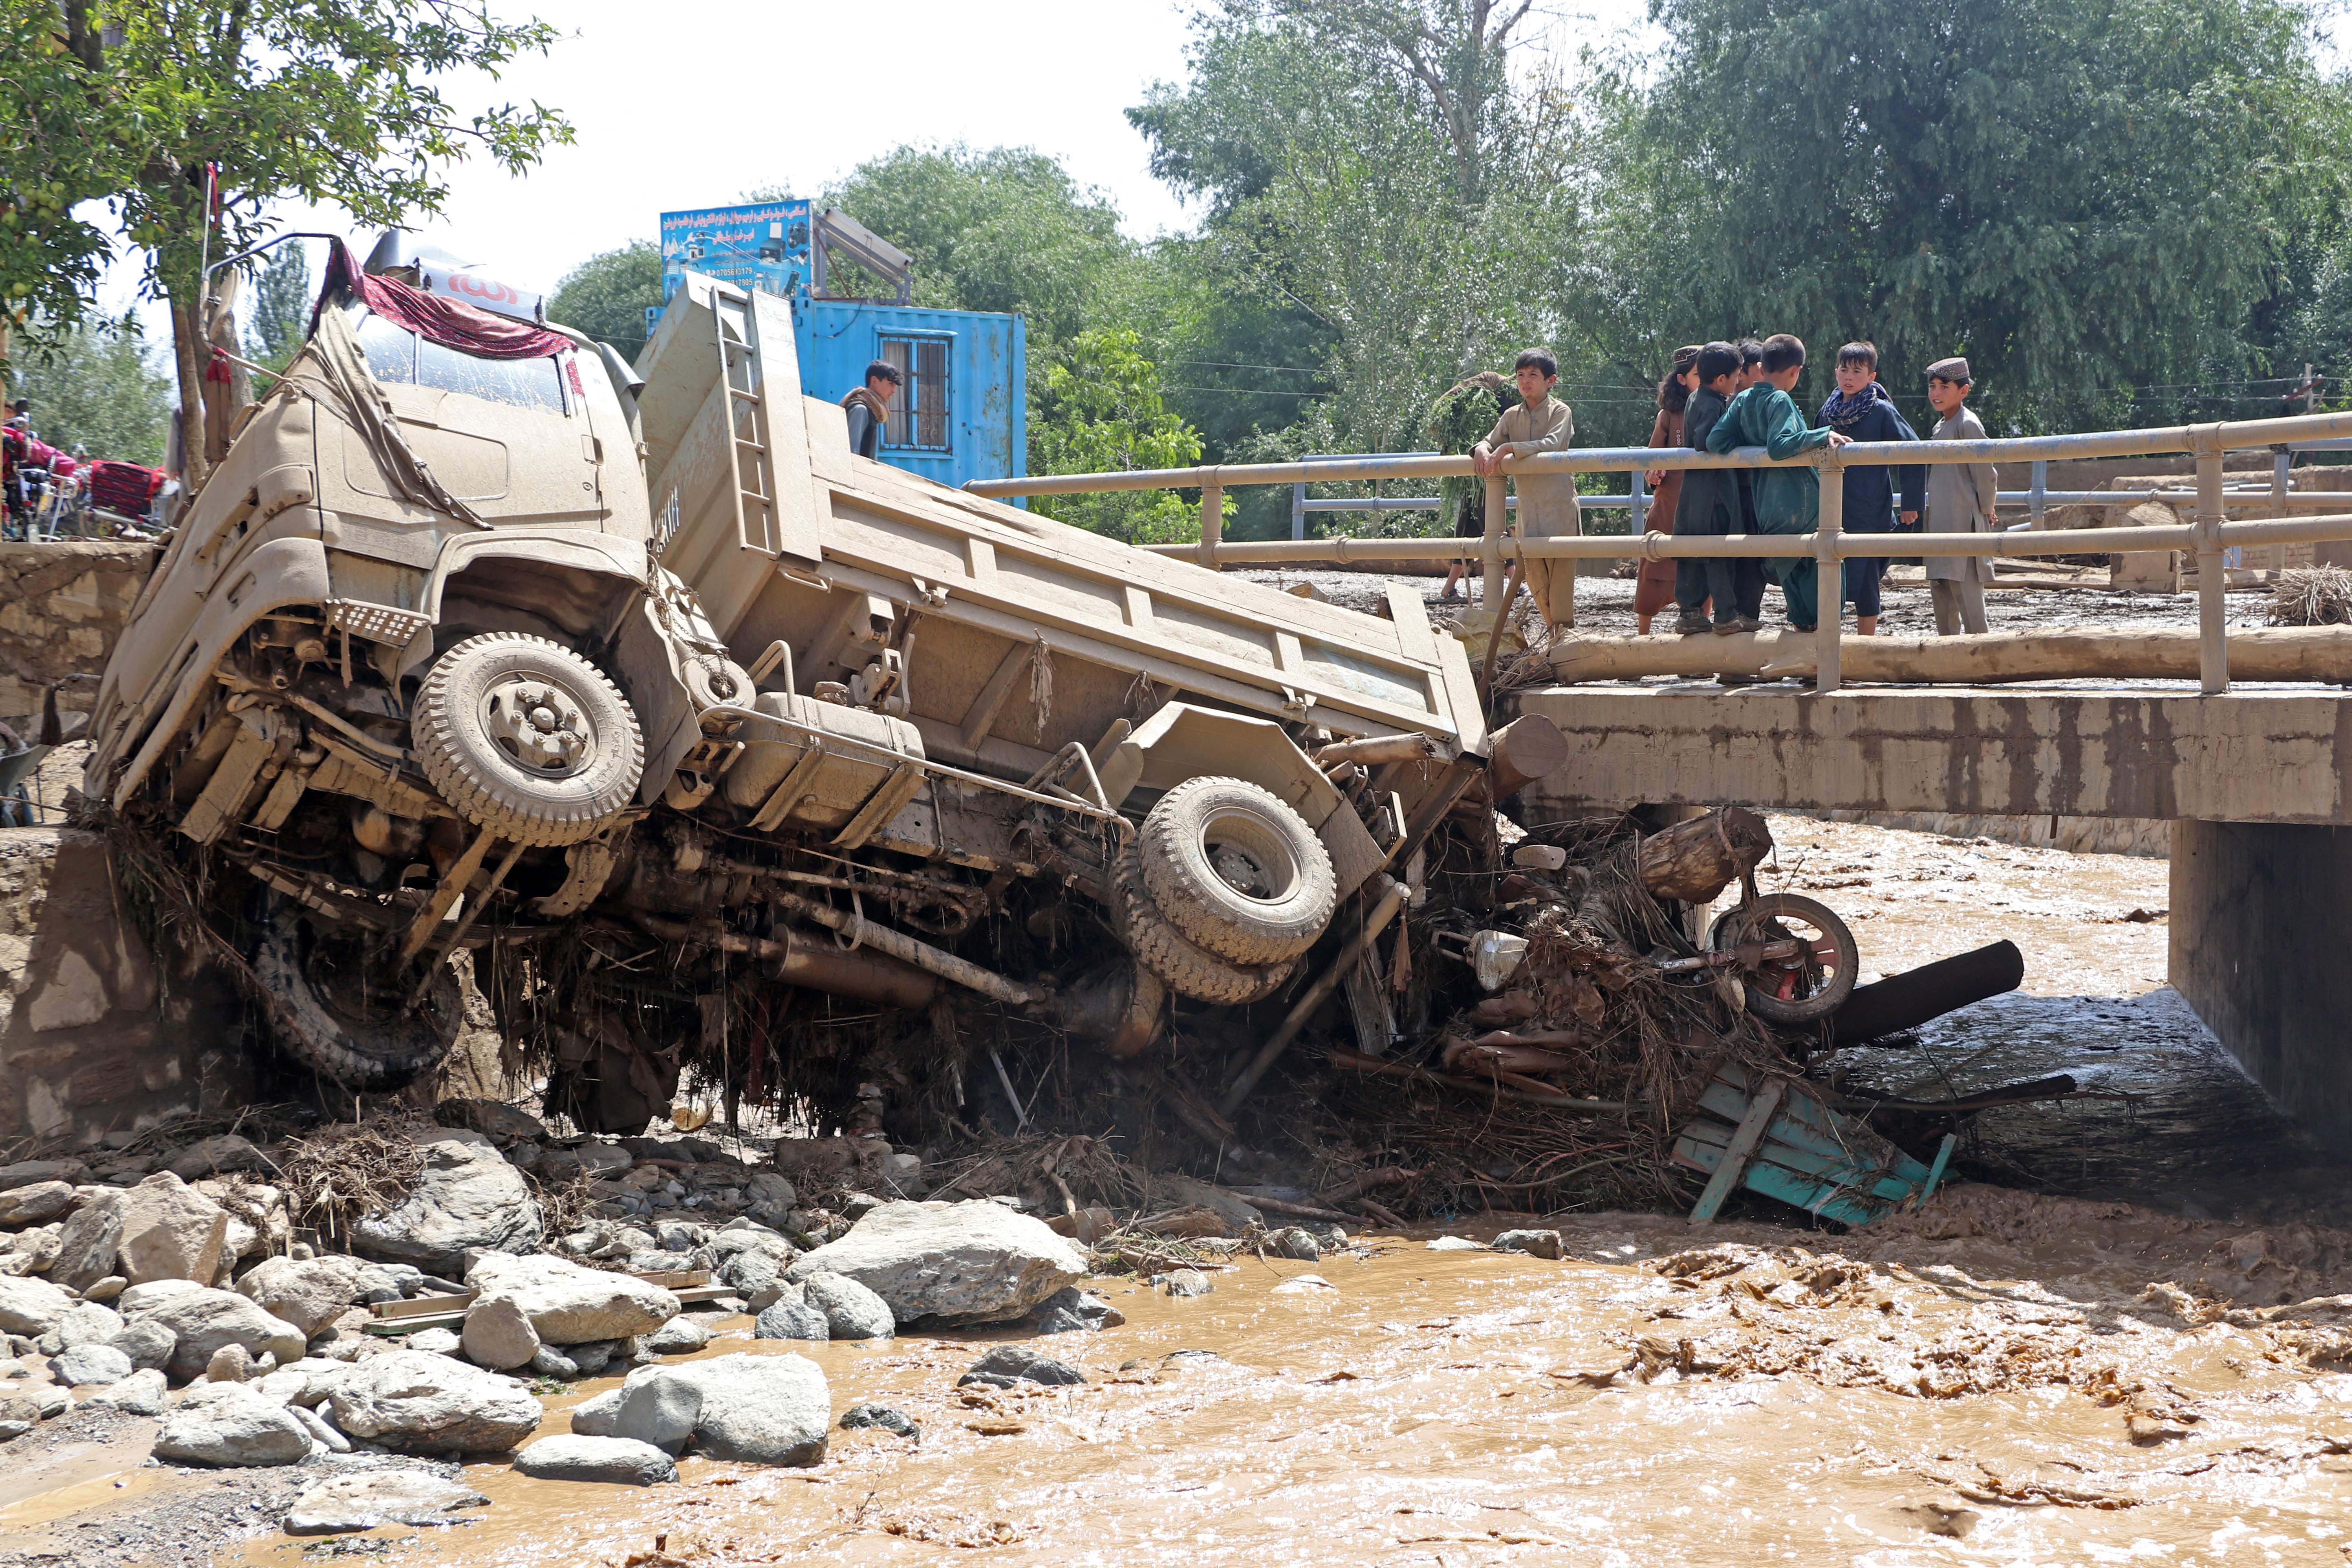 Afghan boys look at a truck that was damaged in flash floods in the Jalrez district of Maidan Wardak province